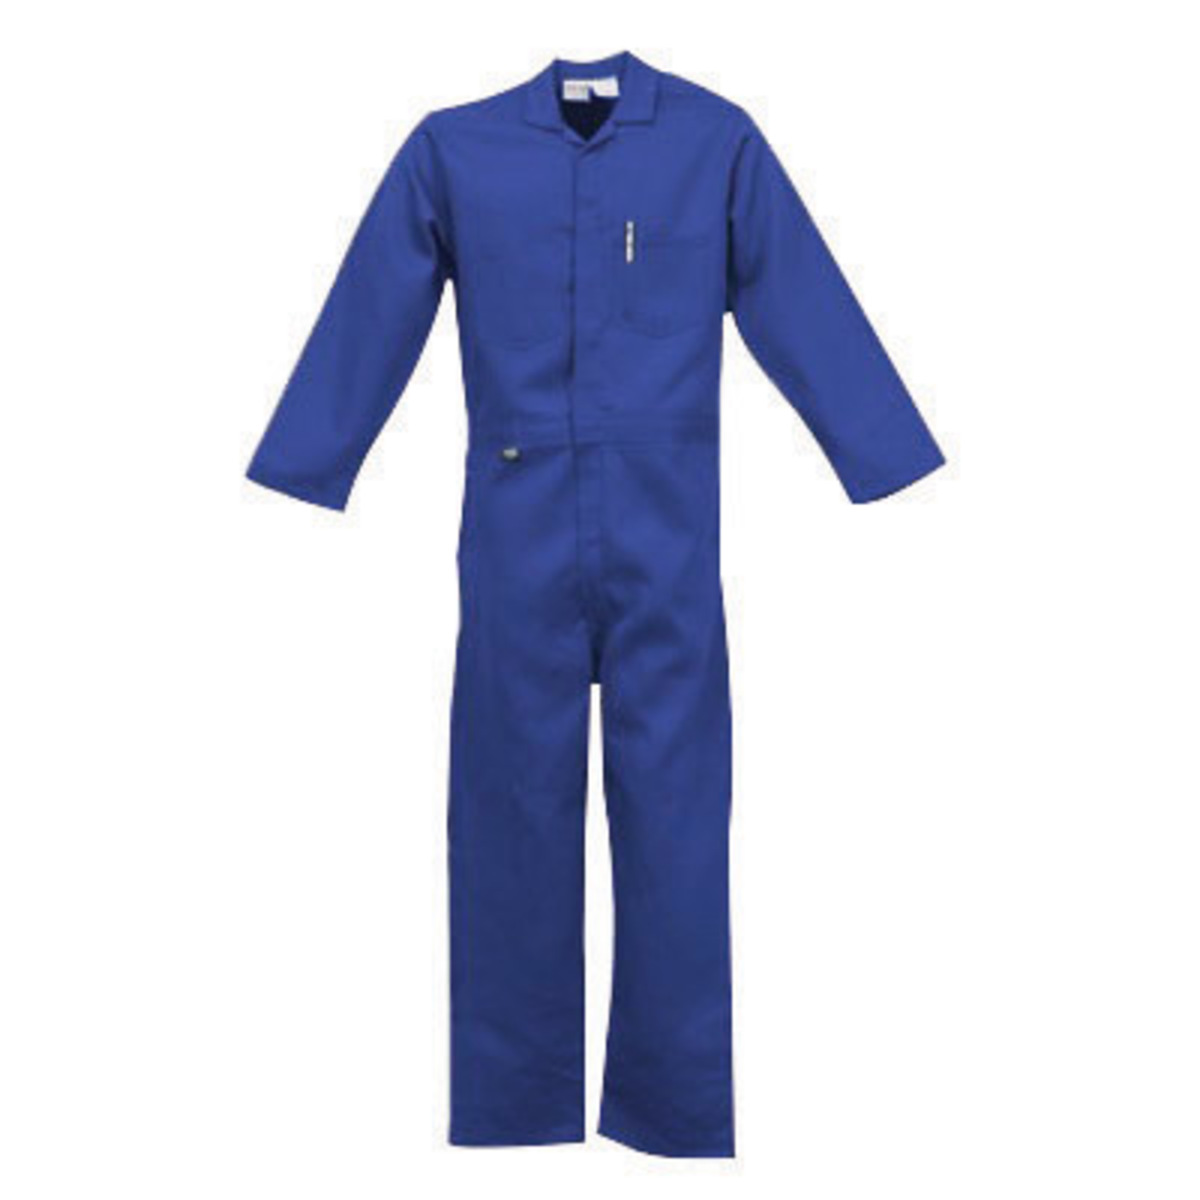 Stanco Safety Products™ 2X Tall Royal Blue Nomex® IIIA Arc Rated Flame Resistant Coveralls With Front Zipper Closure And 1 (4.8